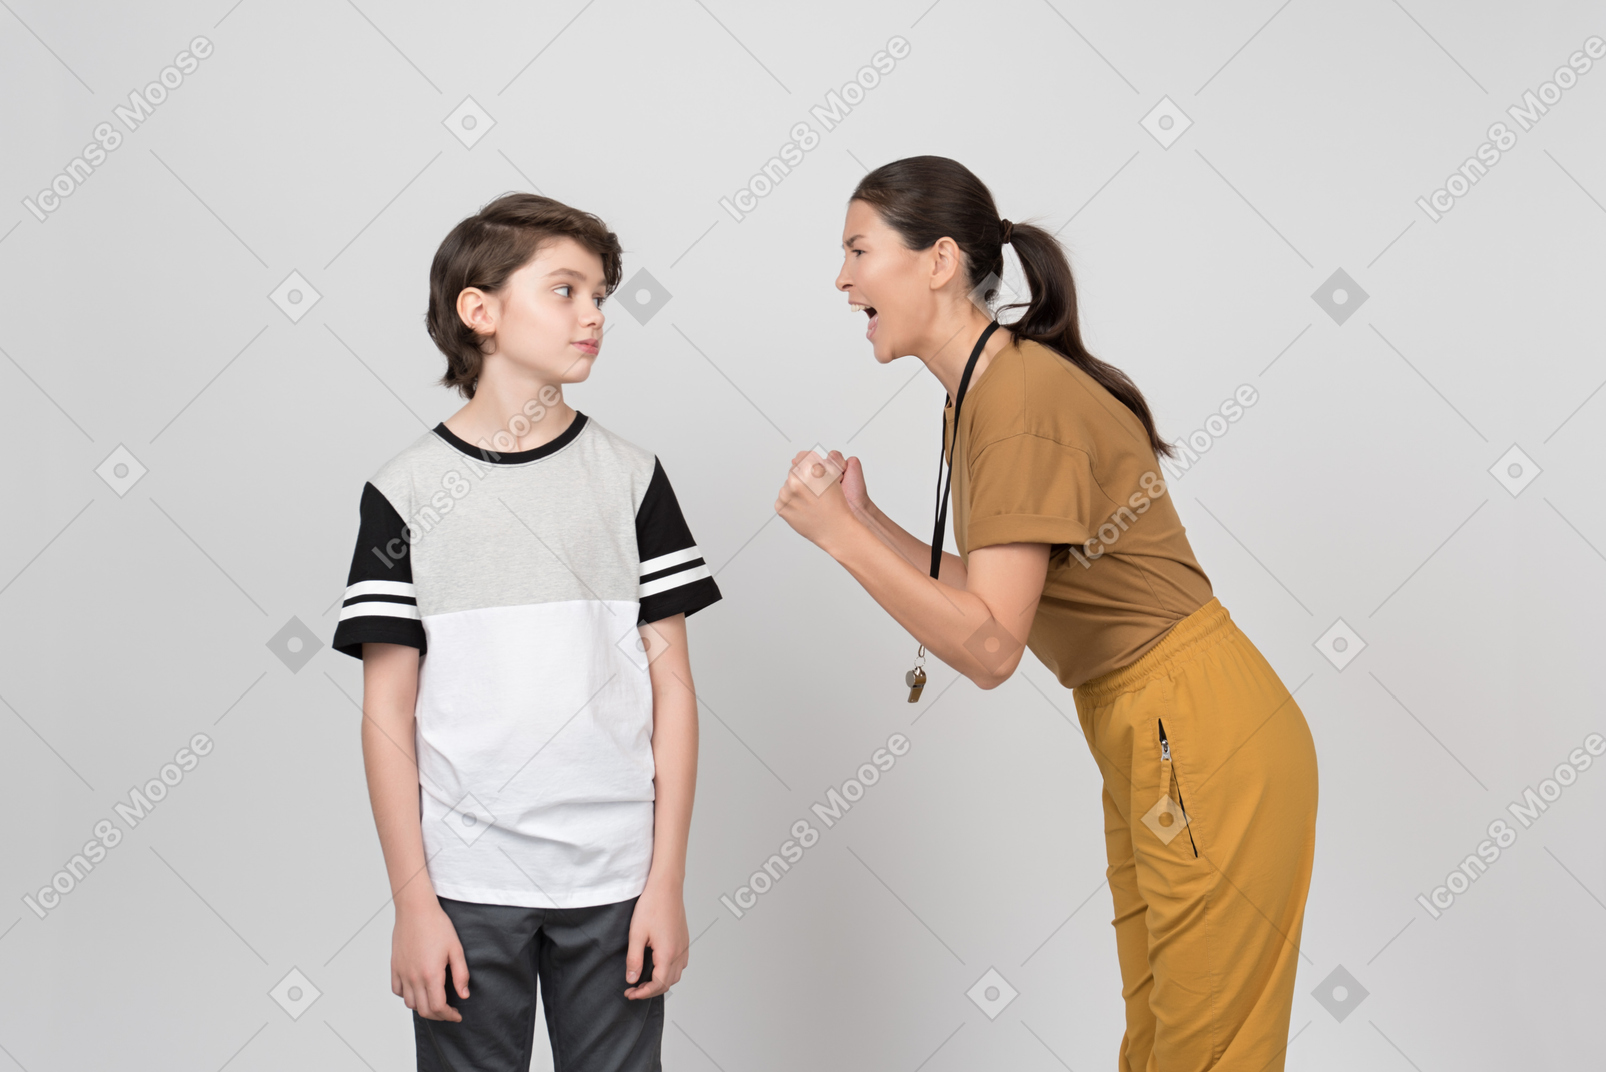 Pe female teacher yelling at her pupil